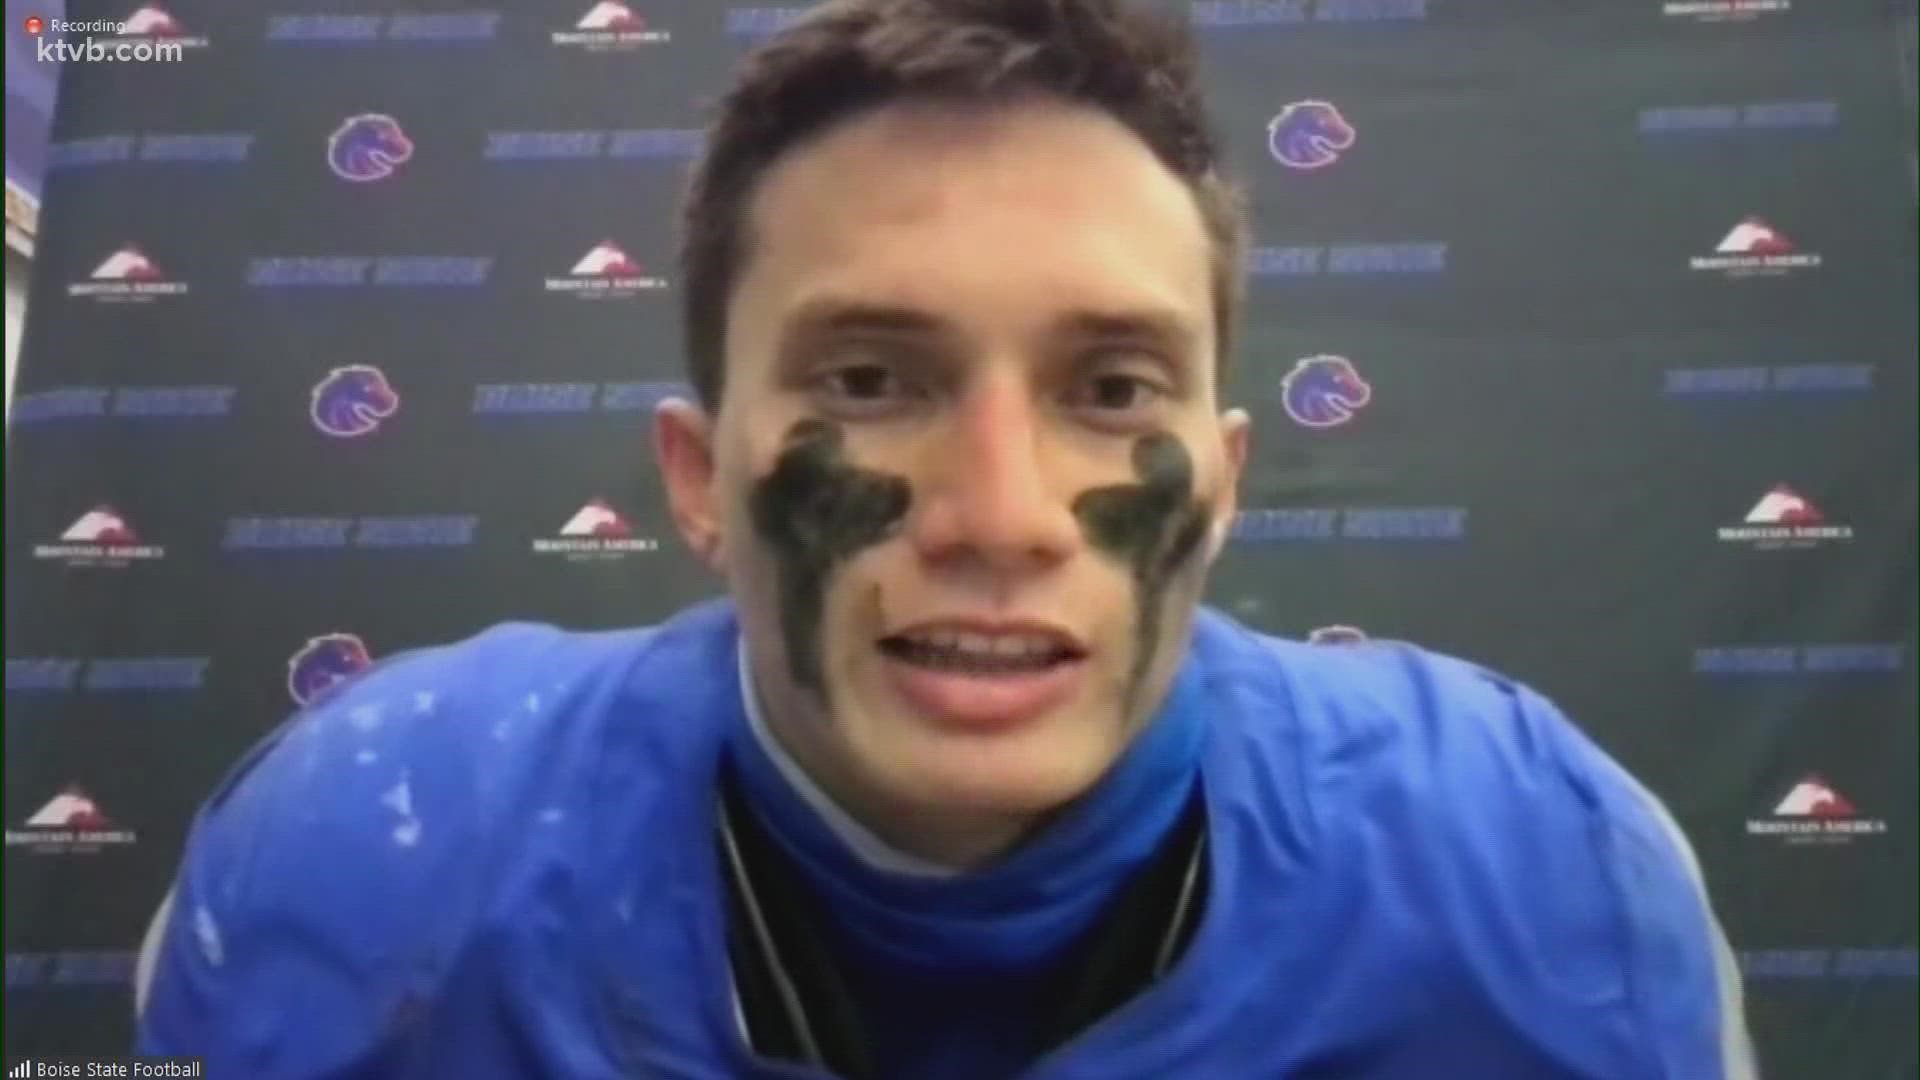 After a 21-20 loss against the Oklahoma State Cowboys, Boise State nickel Kekaula Kaniho discusses what went wrong.